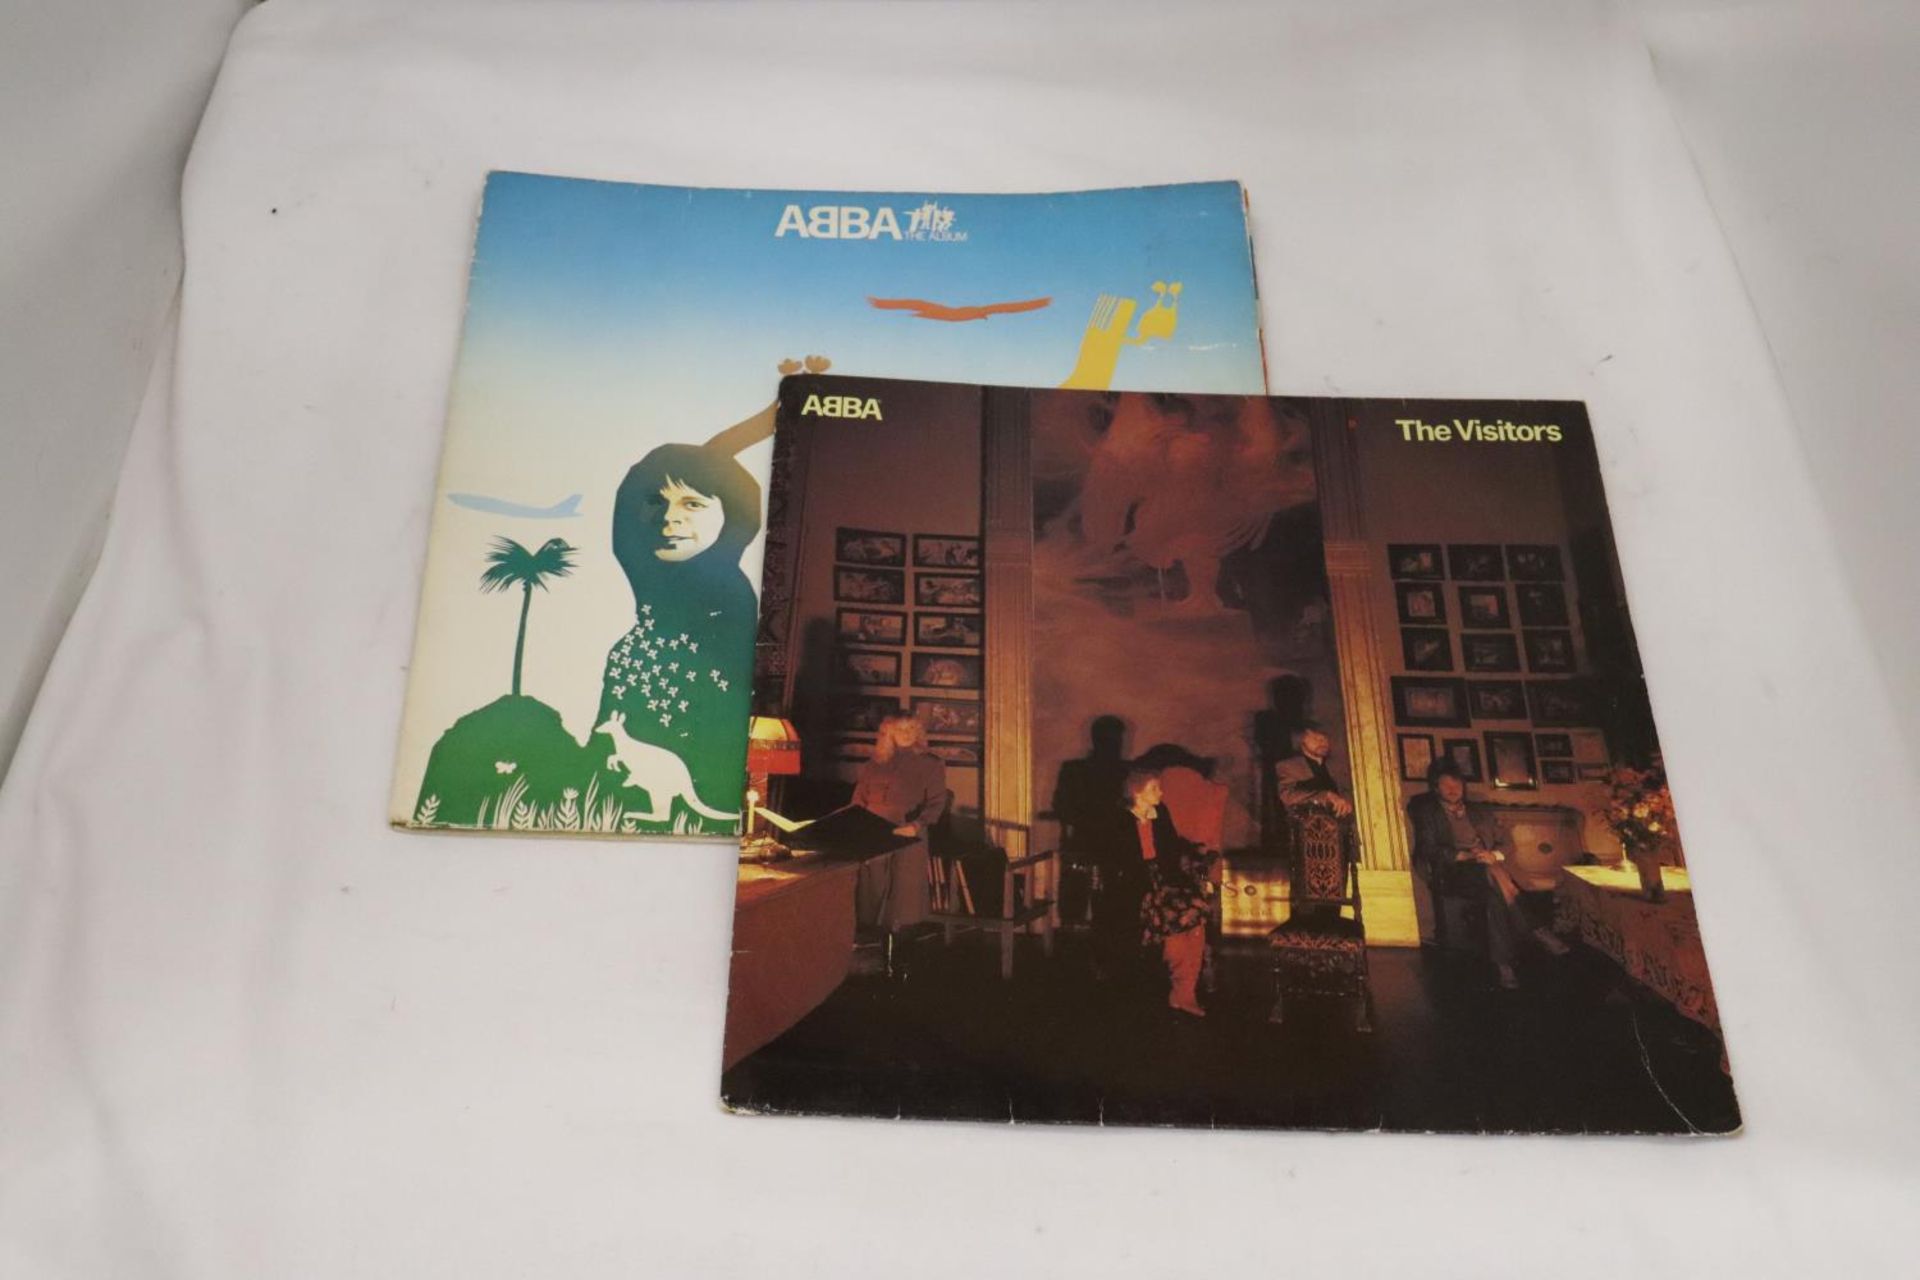 TWO ABBA ALBUMS - 1977 ABBA THE ALBUM AND 1981 THE VISITORS